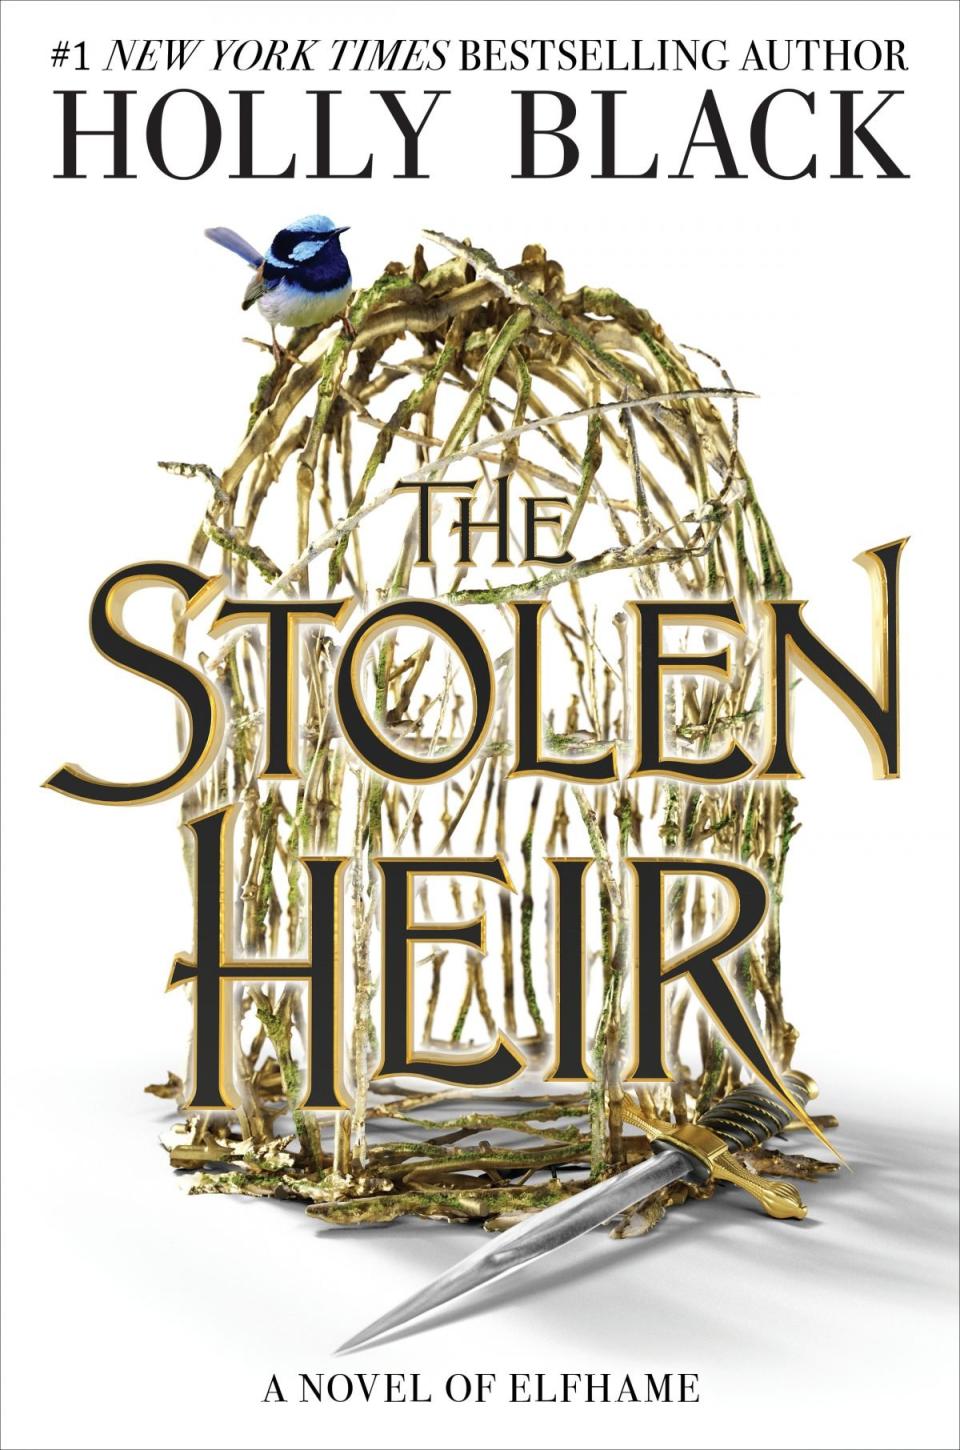 The cover of The Stolen Heir by Holly Black, with text over a gilded cage